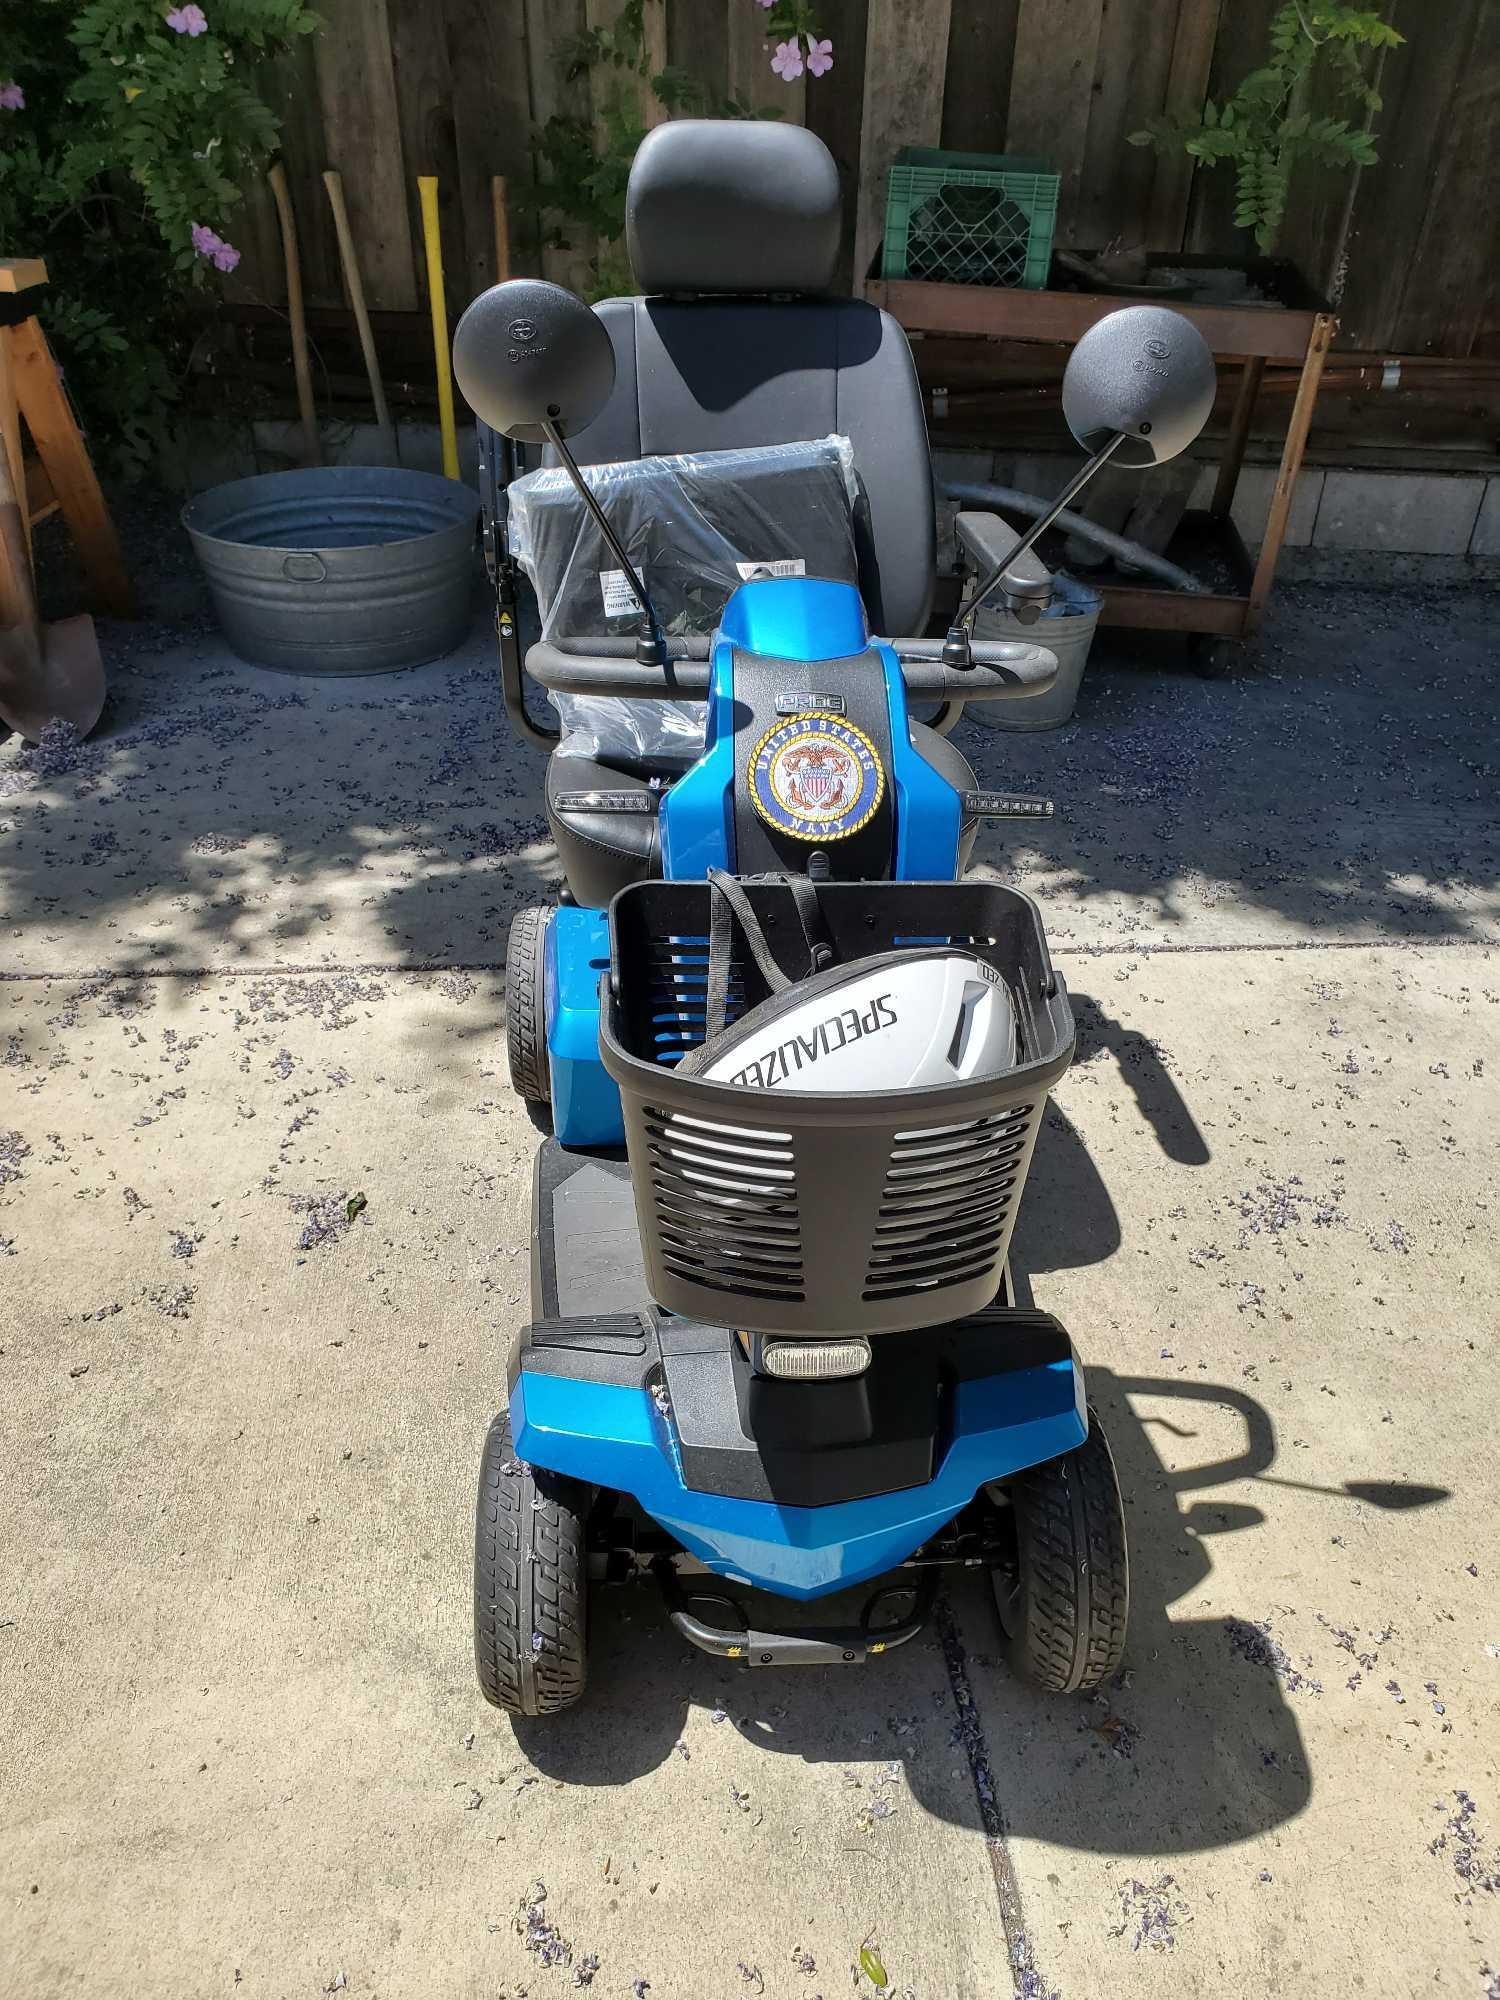 PRIDE VICTORY LX SPORT MOBILITY SCOOTER